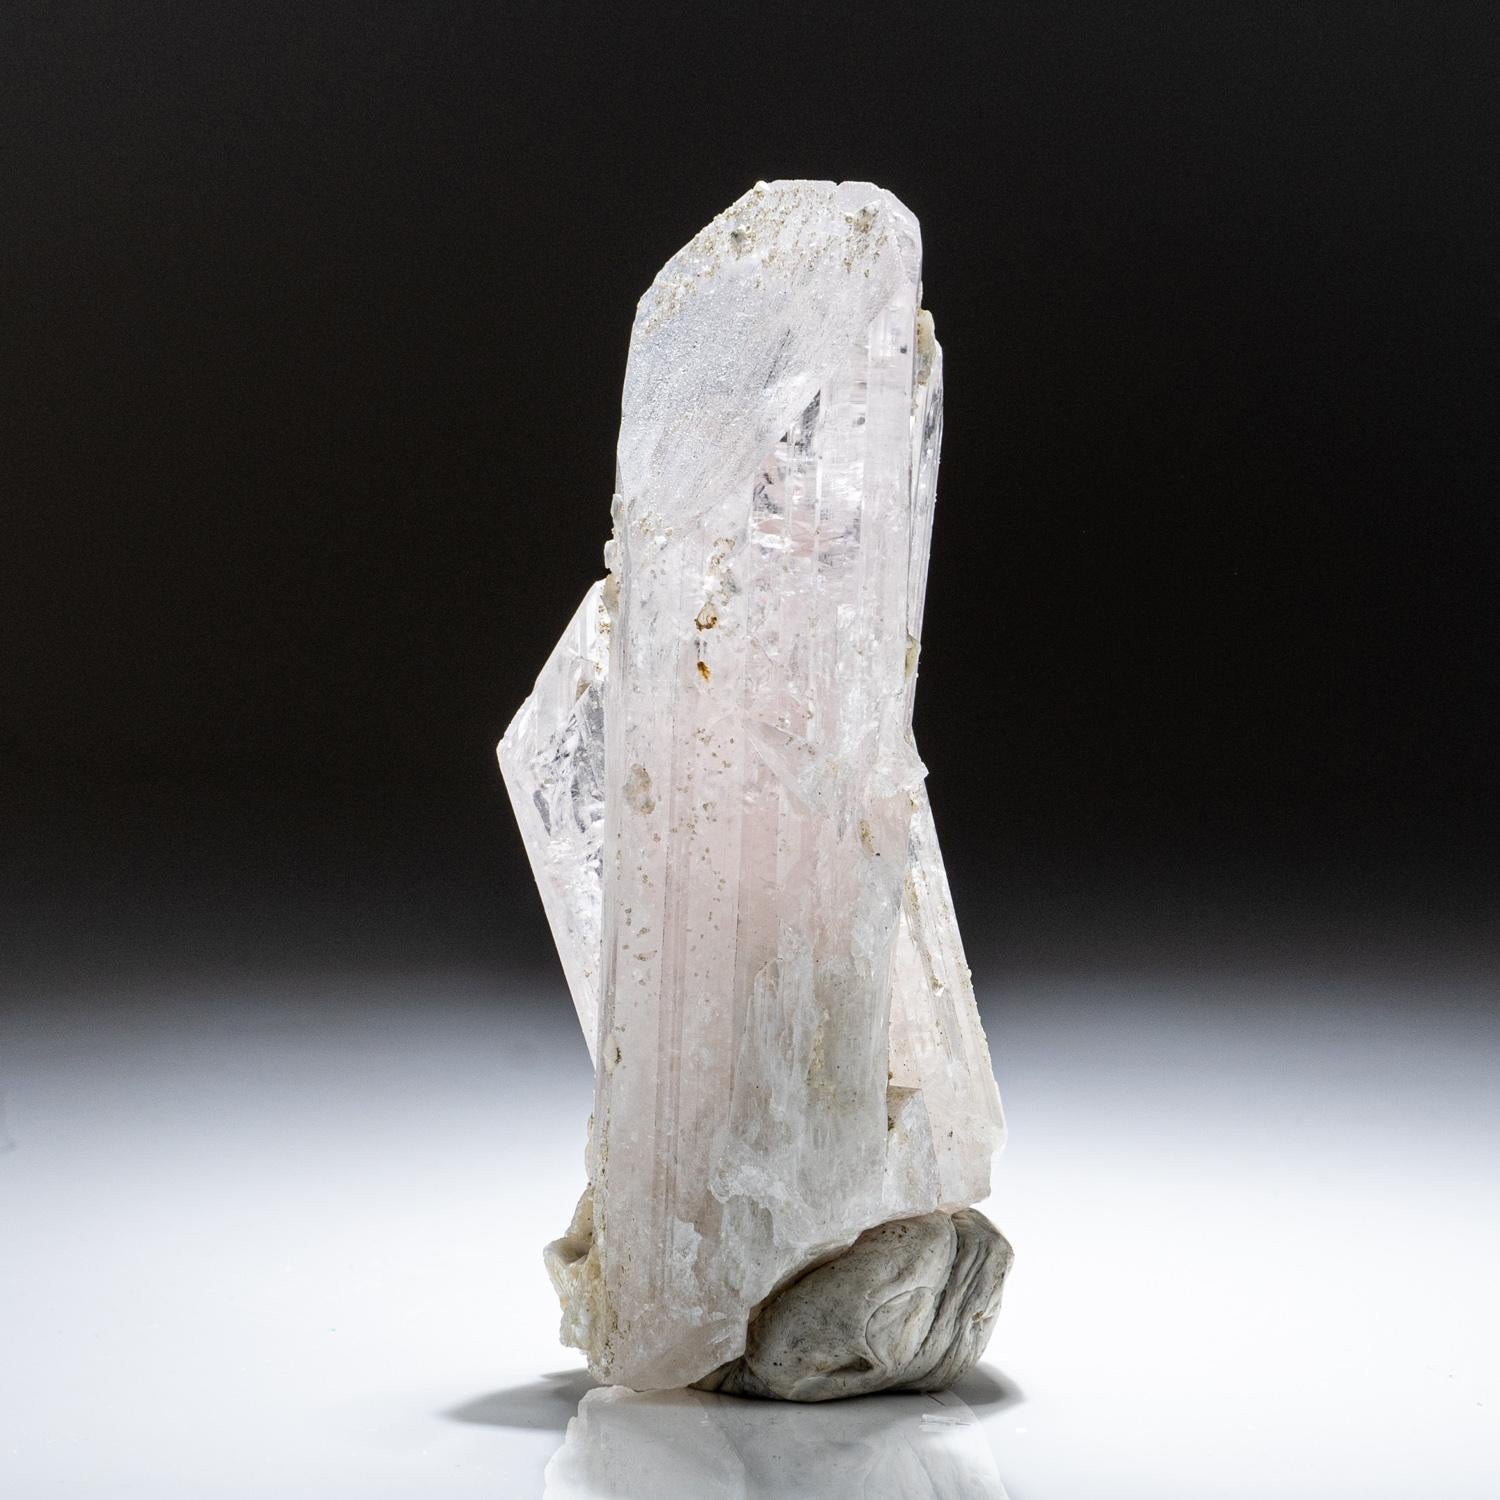 From Mina la Aurora, Charcas District, San Luis Potosi, Mexico. Large transparent to translucent Danburite crystal with secondary growth on matrix. The danburite has lustrous striated crystal faces. The crystal contains a unique combination of